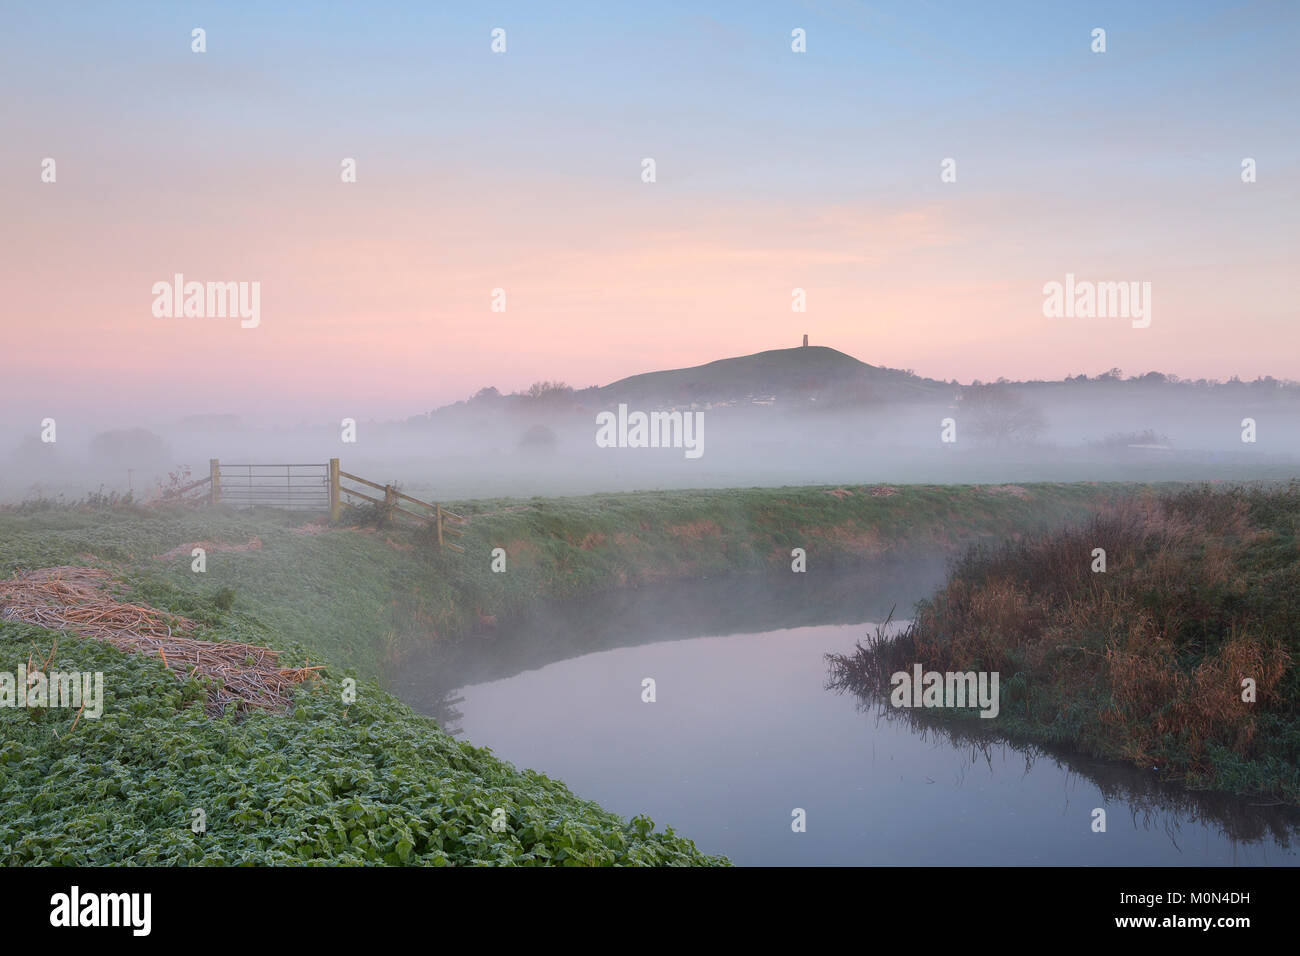 St Michael's Tower and Glastonbury Tor come into view at sunrise as the mist over the River Brue clears. Somerset, England. Stock Photo